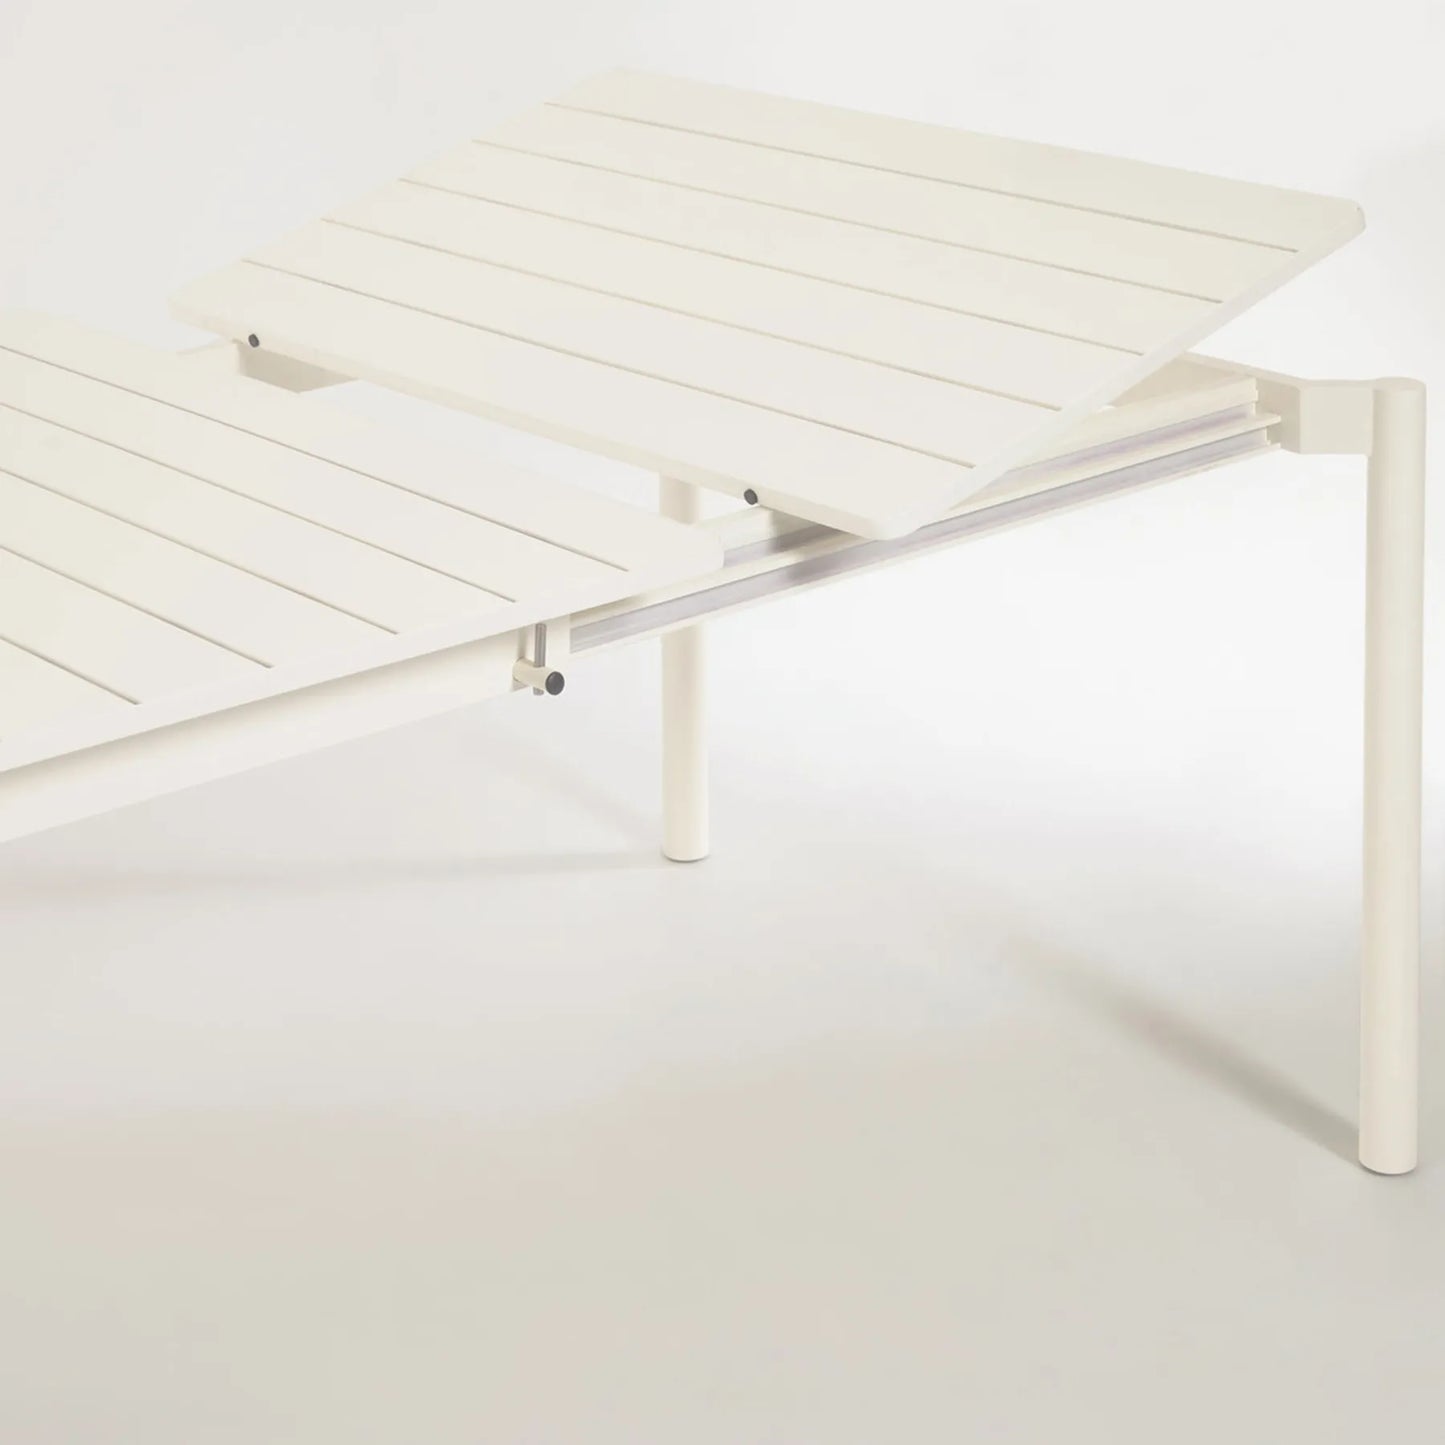 Zaltana Outdoor Extendable Outdoor Dining Table 180cm - White